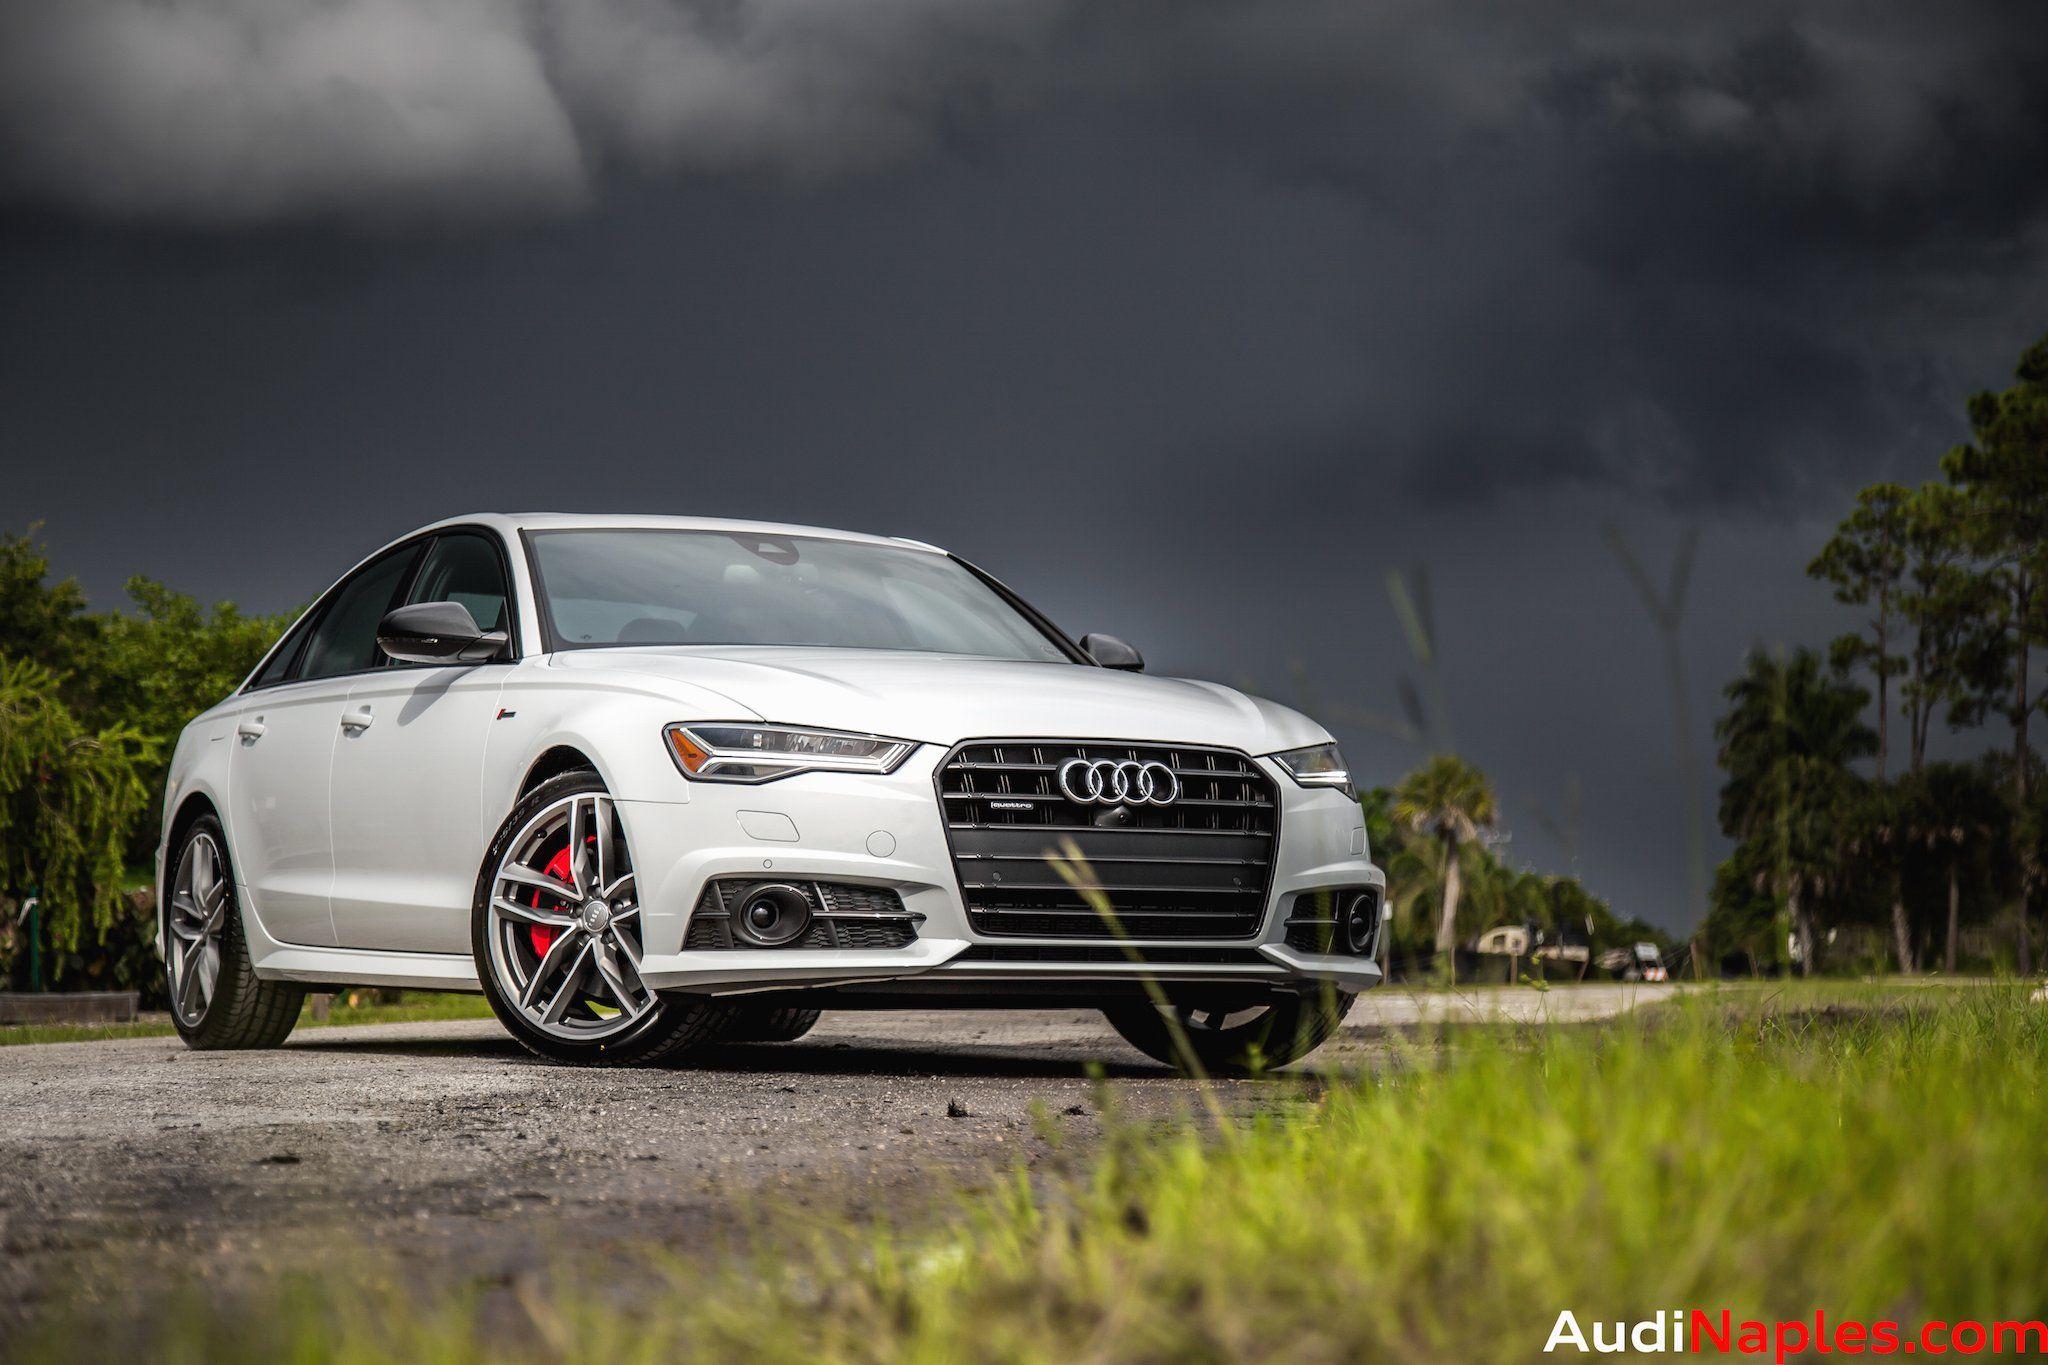 Audi A6 Wallpaper Photo 2048x1365 2018 New Cars Release